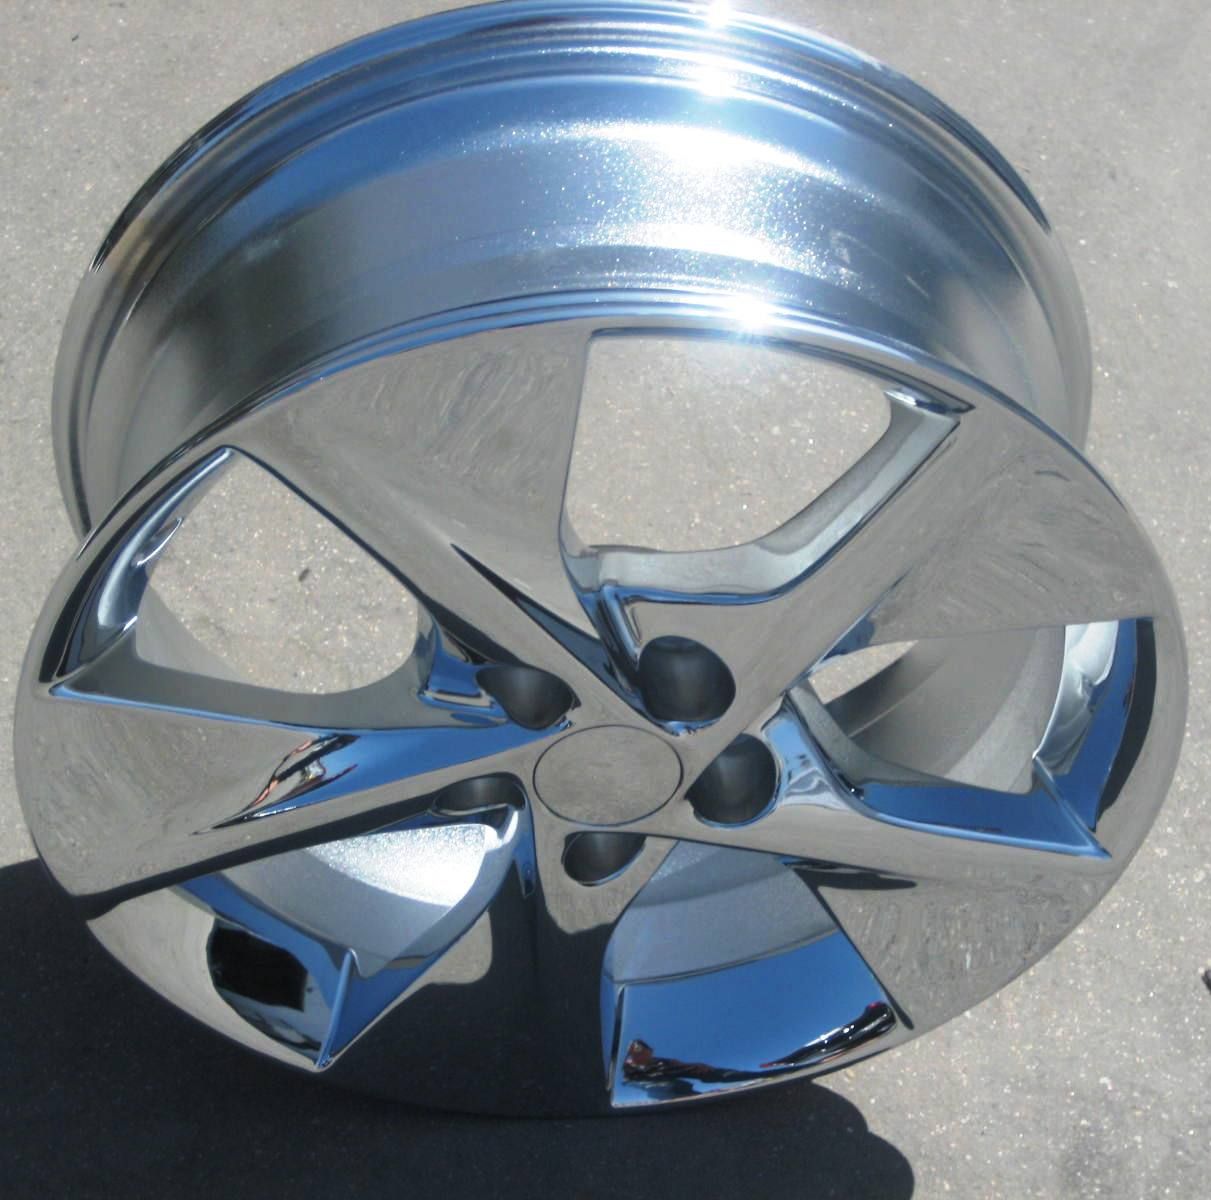  13 18 FACTORY TOYOTA CAMRY OEM CHROME WHEELS RIMS GS350 GS430 IS250